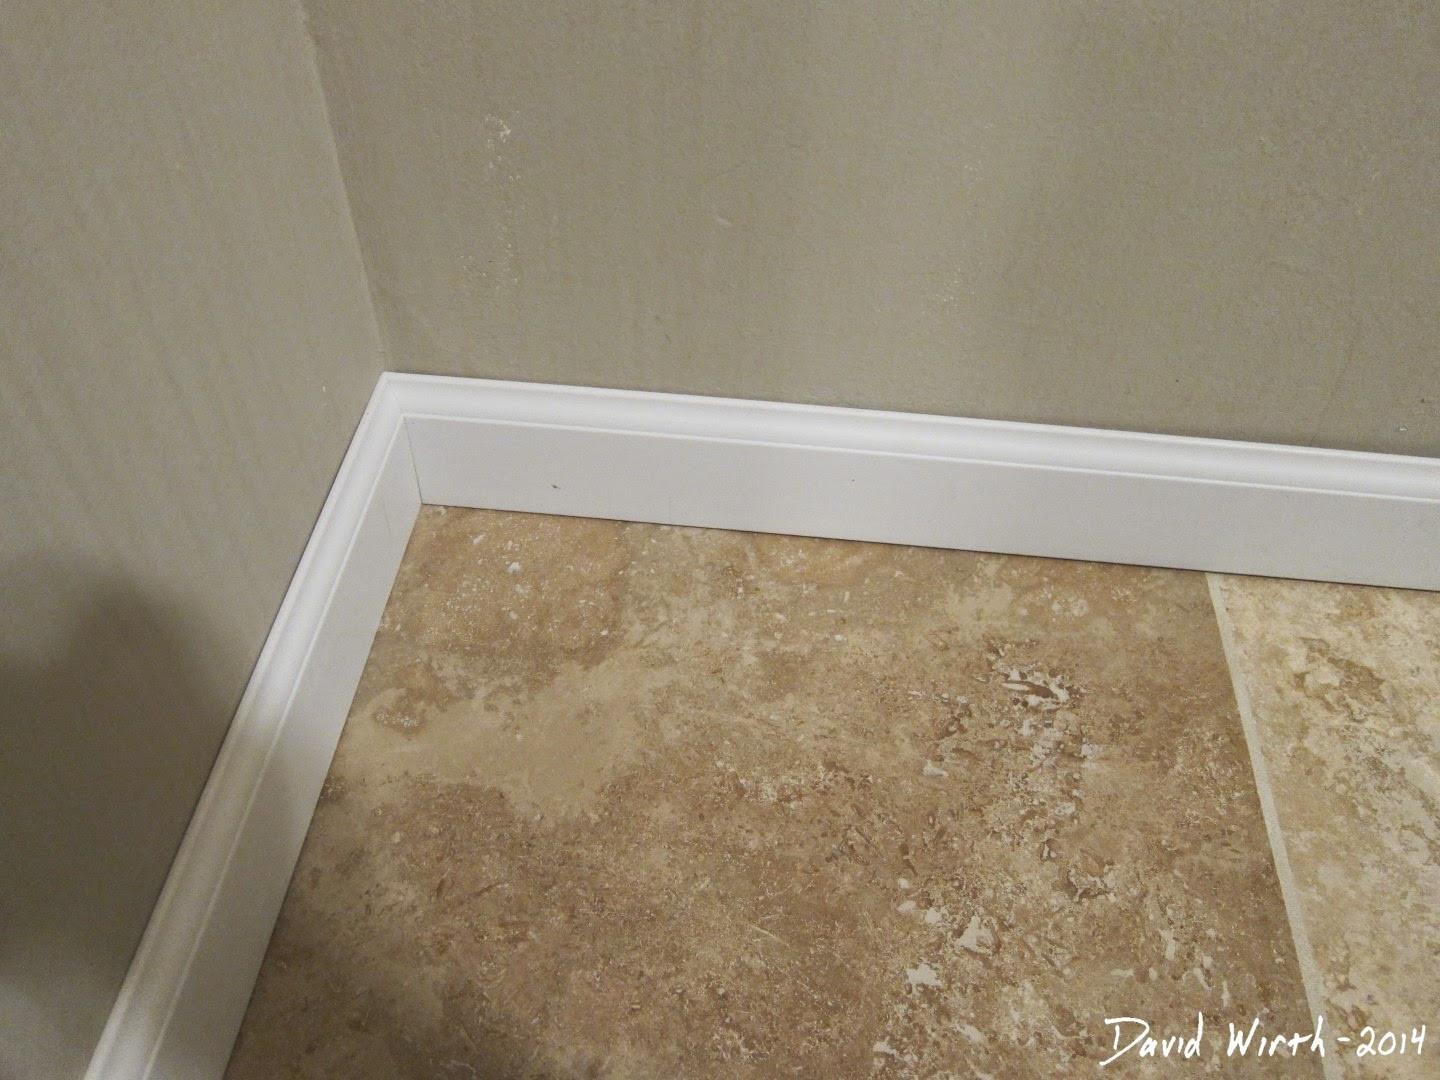 Tile Baseboard In Bathroom
 No title required December 2014